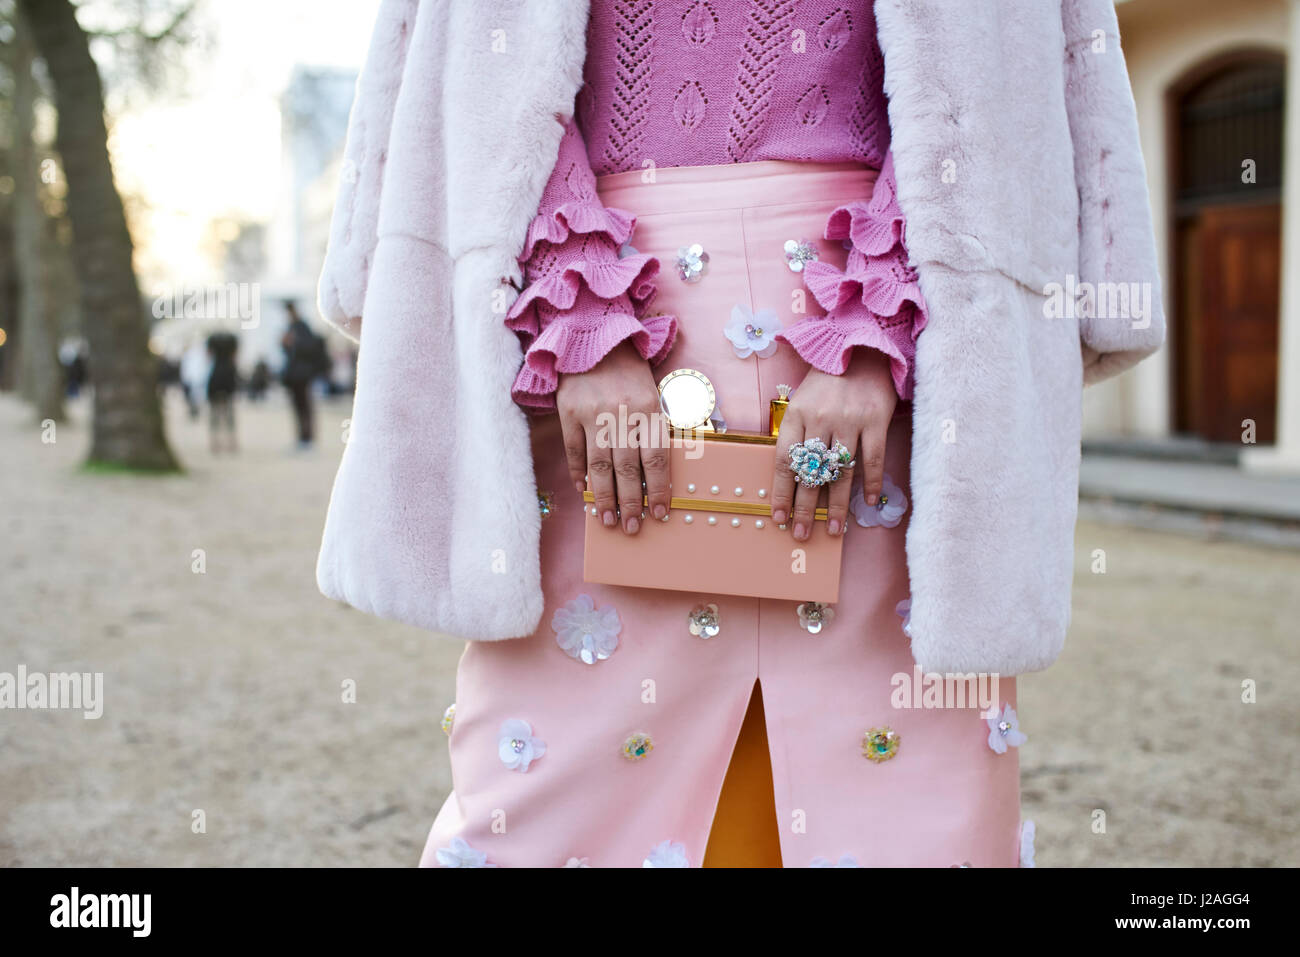 LONDON - FEBRUARY, 2017: Mid section of woman dressed in shades of pink, with a ruffle sleeved sweater, a coat over her shoulders and a skirt with appliqué, holding a decorated purse in the street during London Fashion Week, horizontal, front view Stock Photo